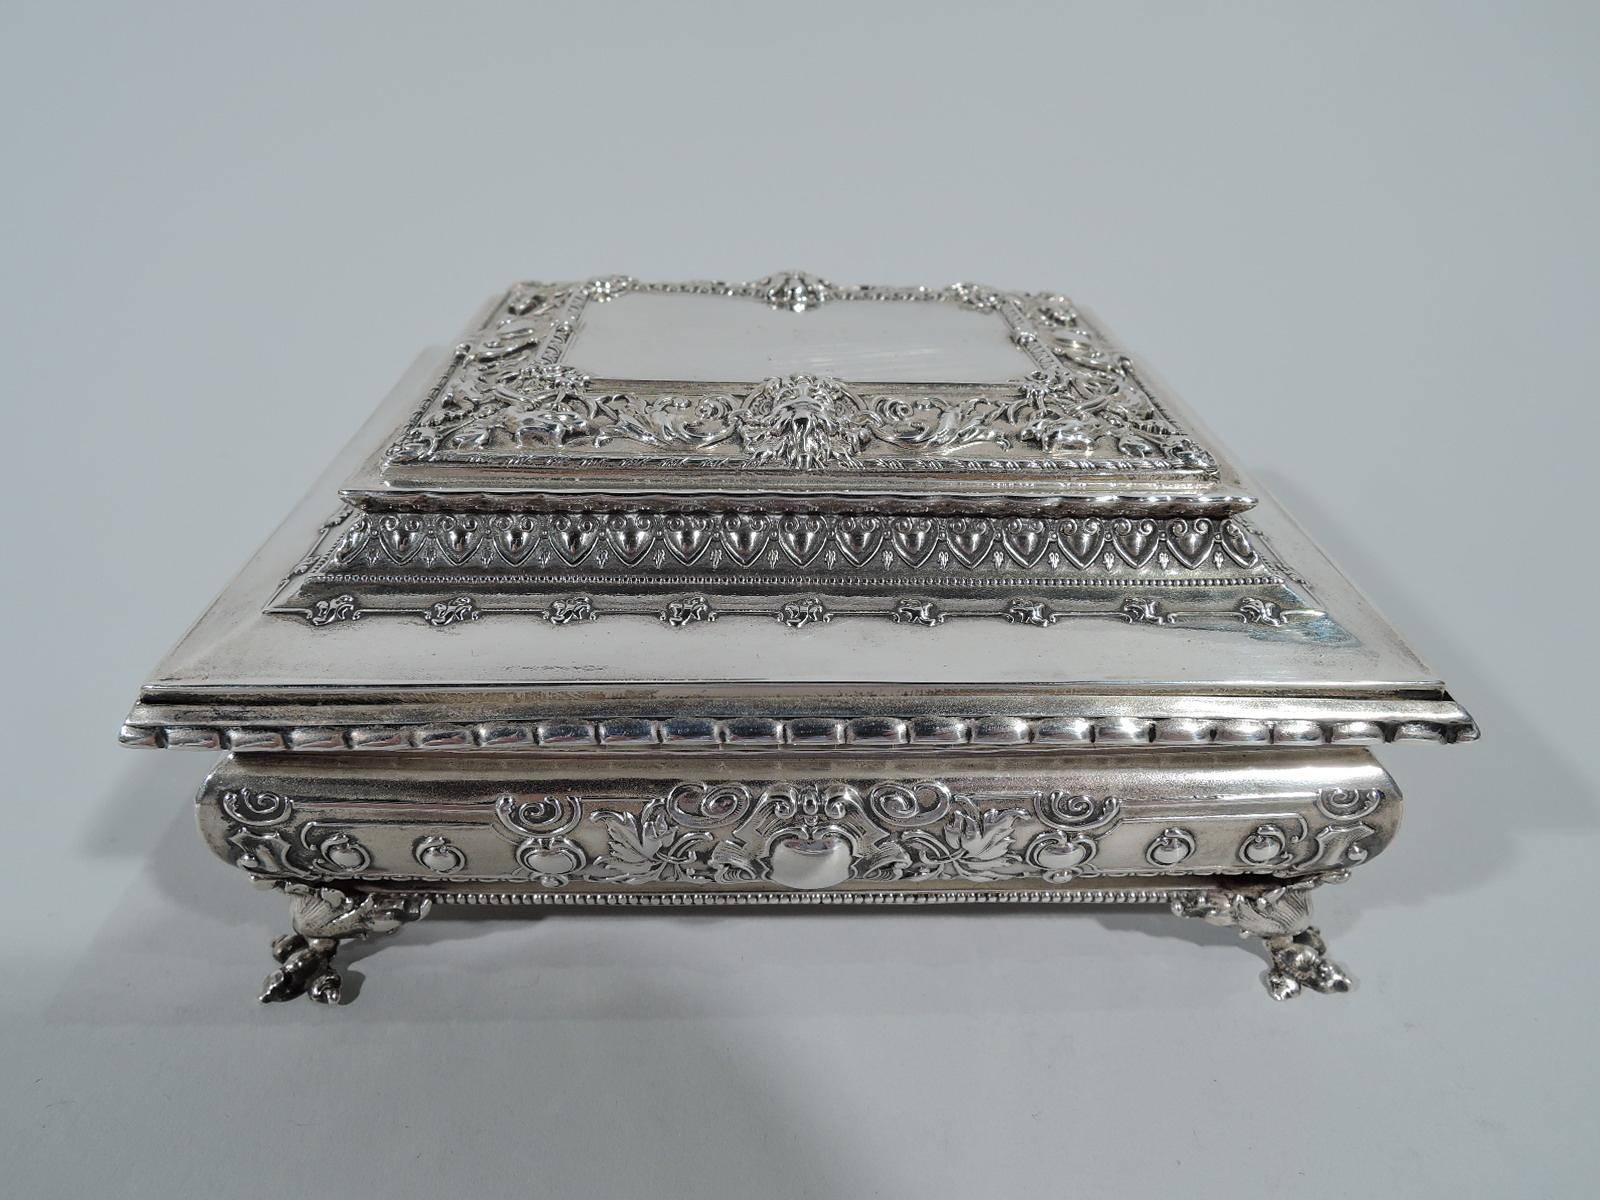 Fancy sterling silver keepsake box. Made by Kerr in Newark, circa 1890. Rectangular with bellied sides. Cover stepped, inset, and hinged. Four corner leaf-mounted talon supports. Classical ornament with leaf-and-dart, beading, masks, and foliate